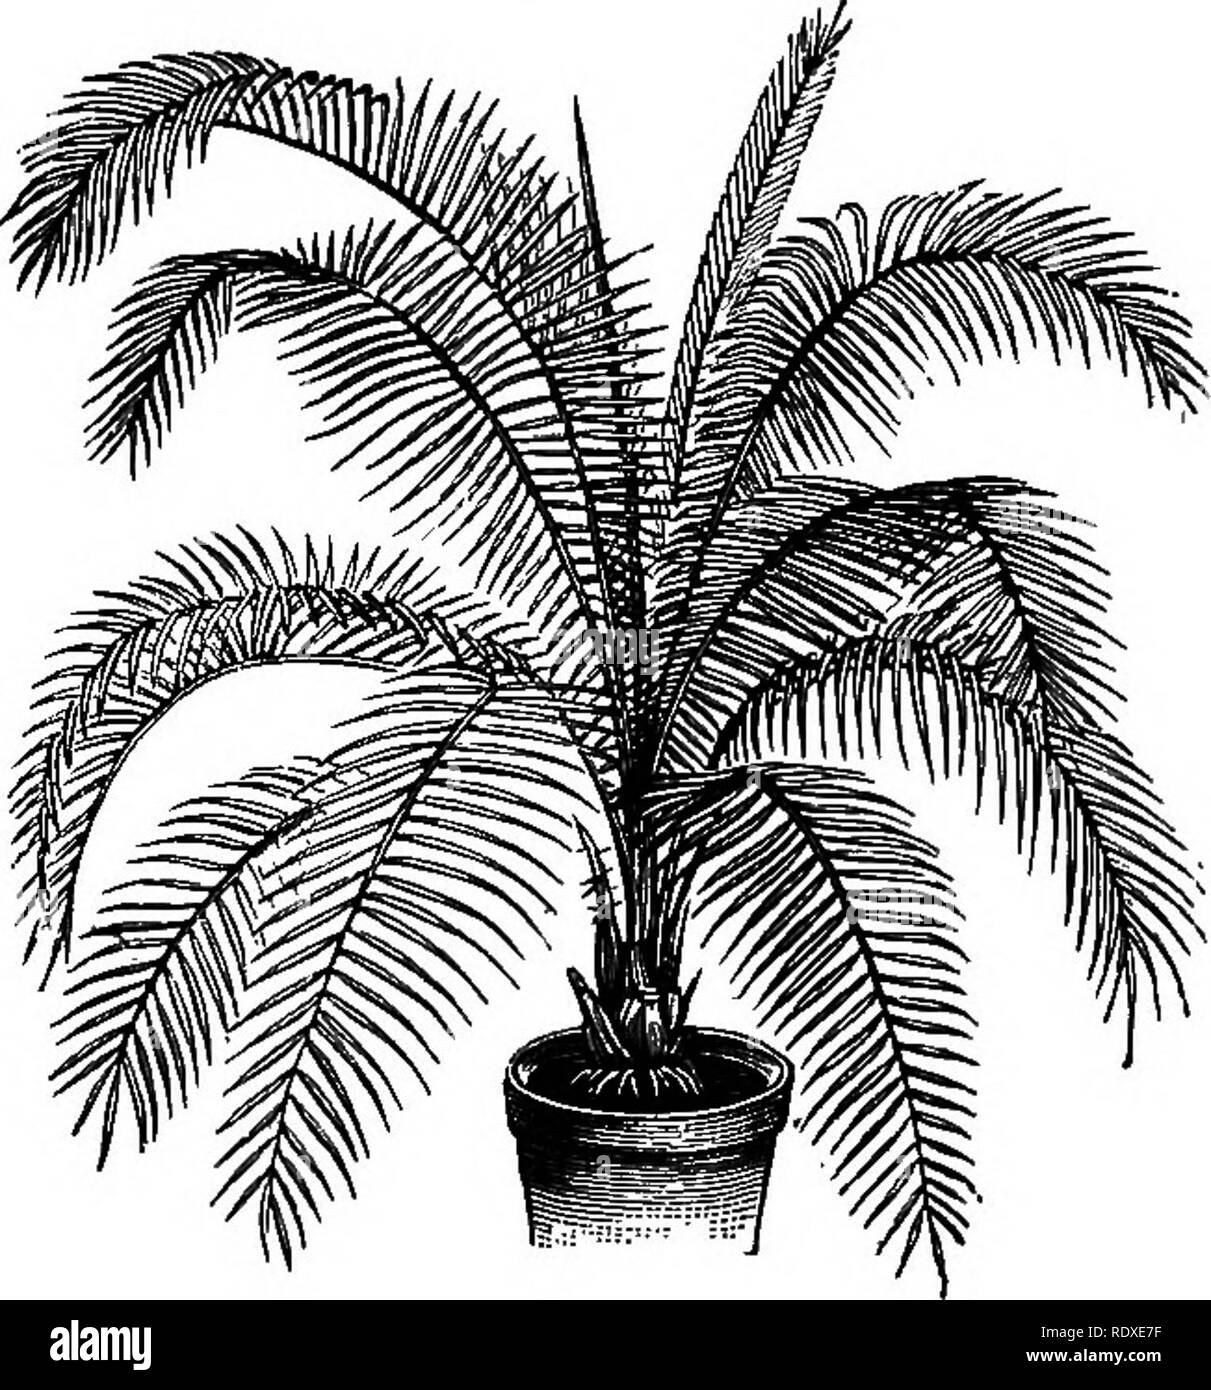 . The Book of gardening; a handbook of horticulture. Gardening; Horticulture. 842 THE BOOK OF GARDENING. decorative purposes; it may be described as a P. dactylifera, only of slenderer habit .(Fig. 561). P. dactylifera (true Date Palm) grows very freely .under greenhouse treatment, and can be used with success for indoor decoration when young; the leaves are pinnate, long, and of a deep green; the pinnae, are linear- lanceolate, and stand out nearly straight&quot;; it reaches in its native country a height varying from 100ft. to 120ft. P. farinifera is another compact species of elegant statur Stock Photo